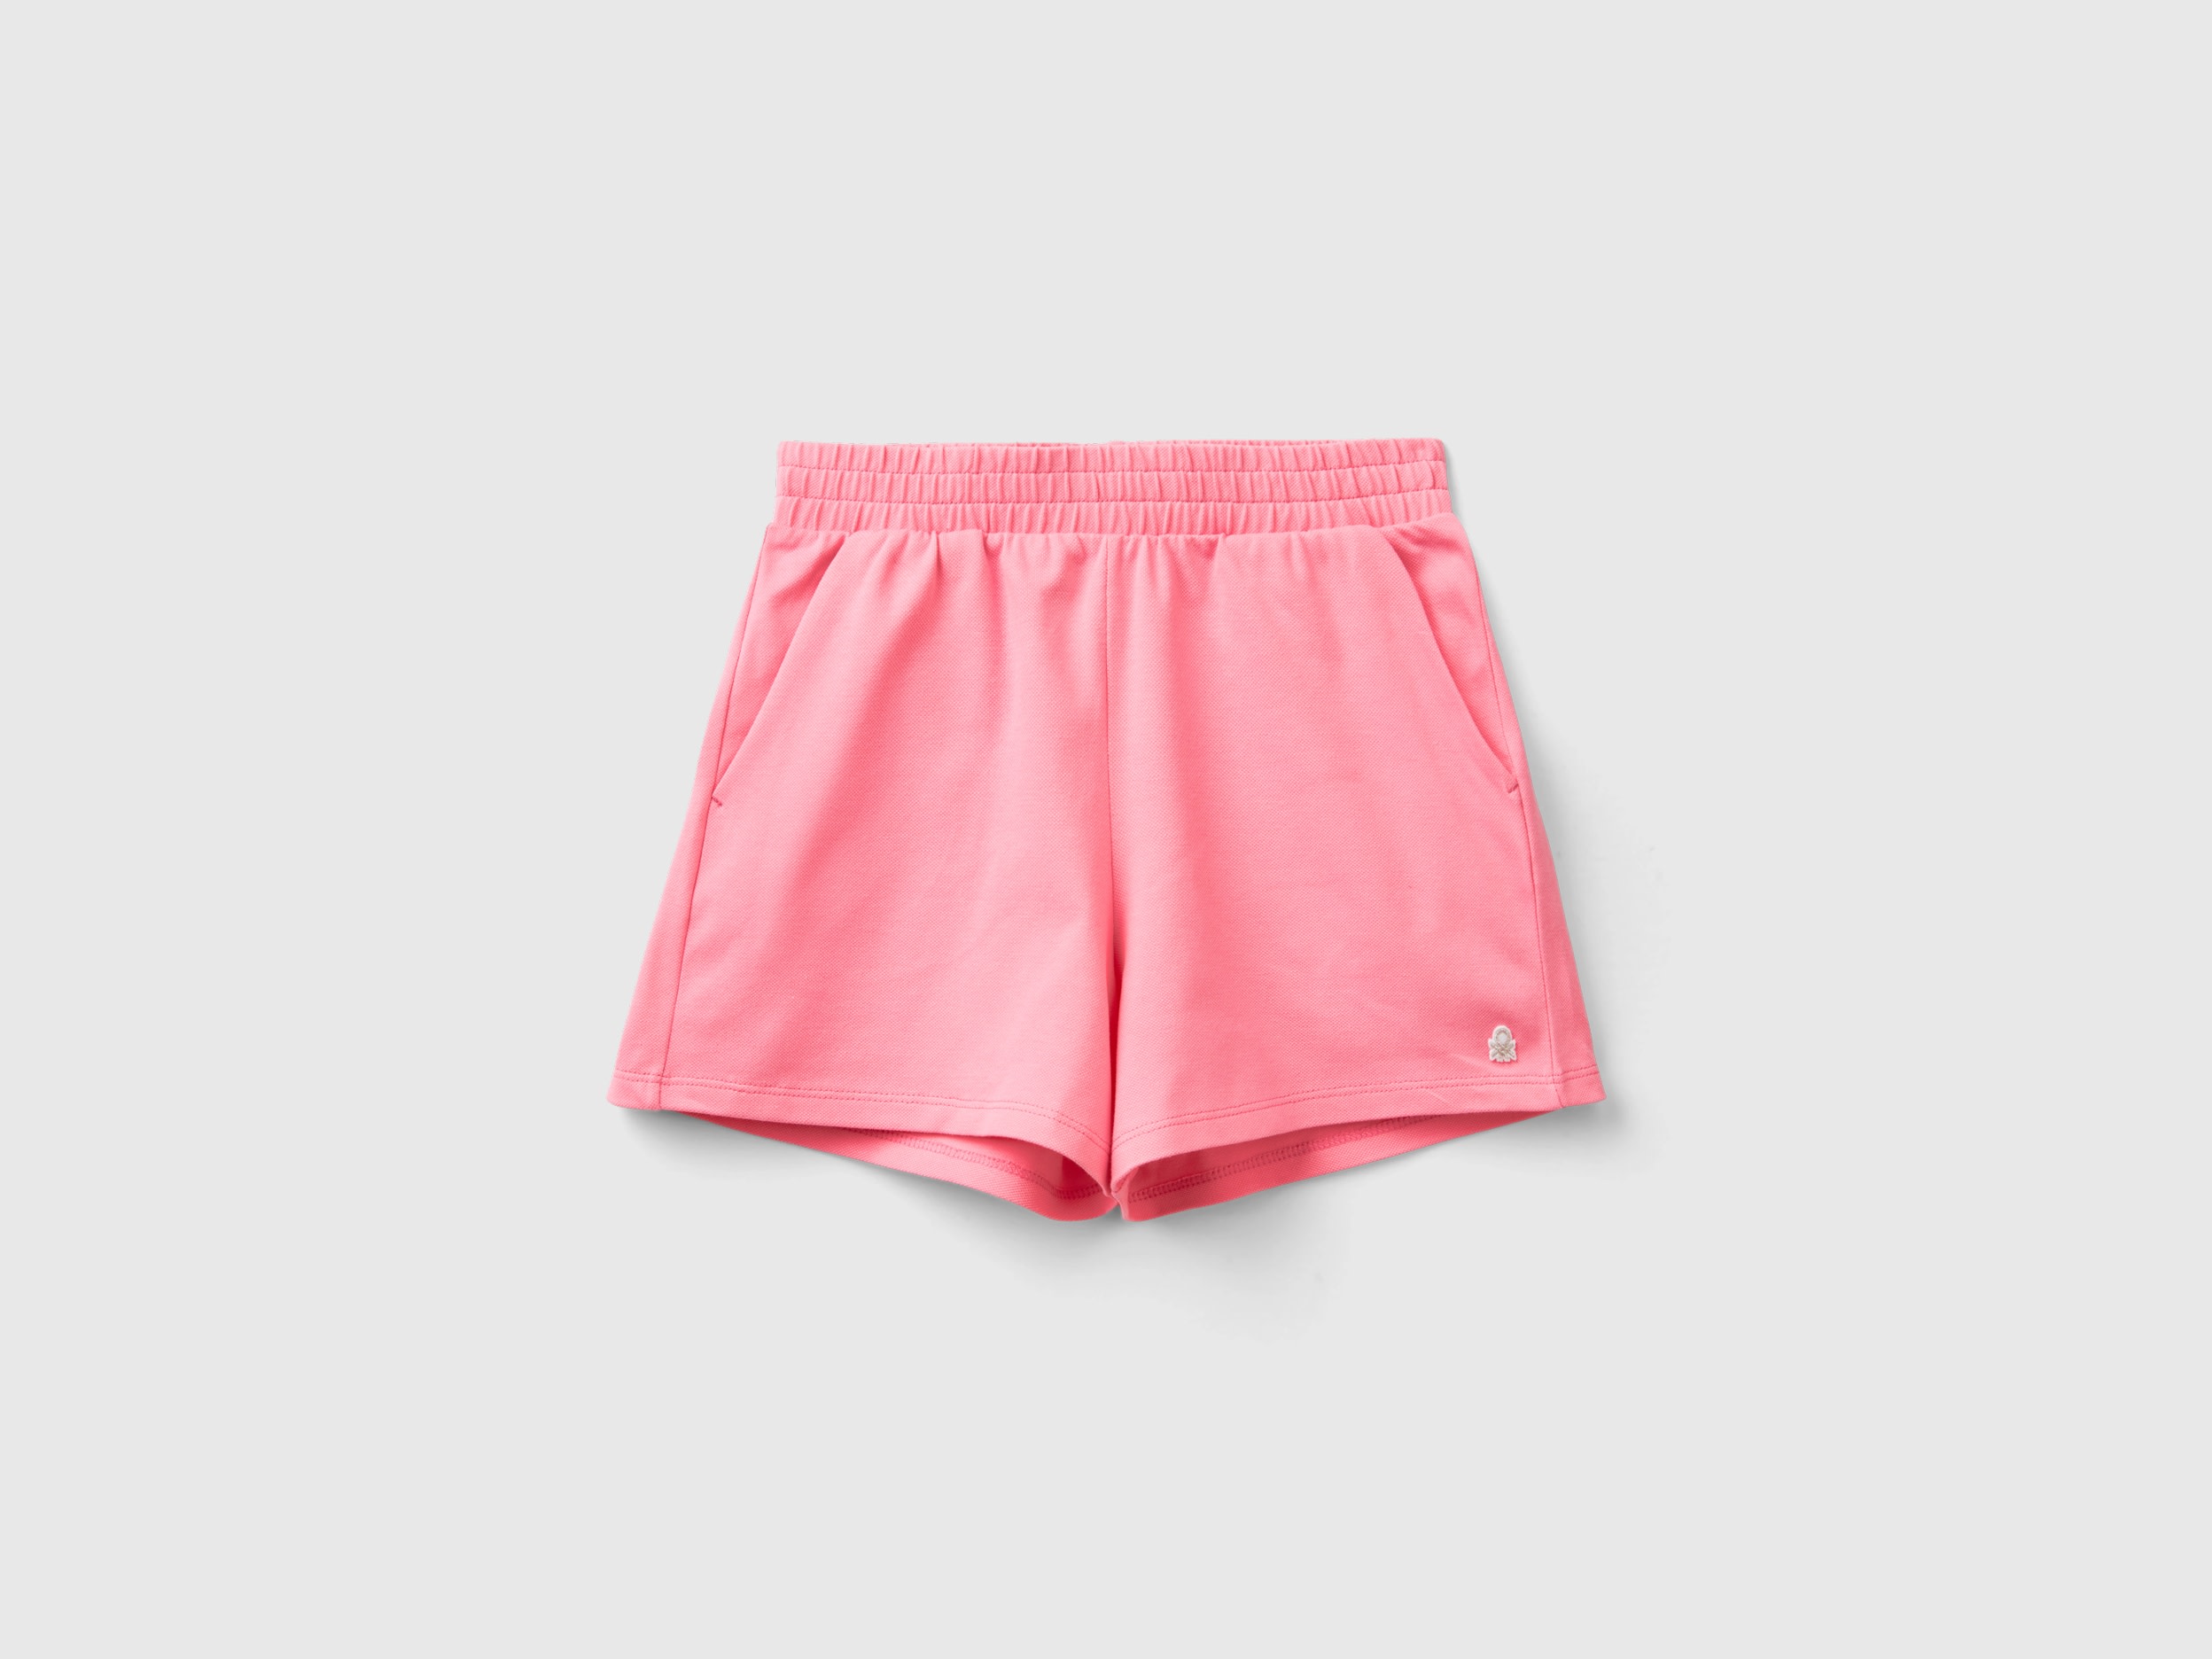 Image of Benetton, Stretch Organic Cotton Shorts, size S, Pink, Kids